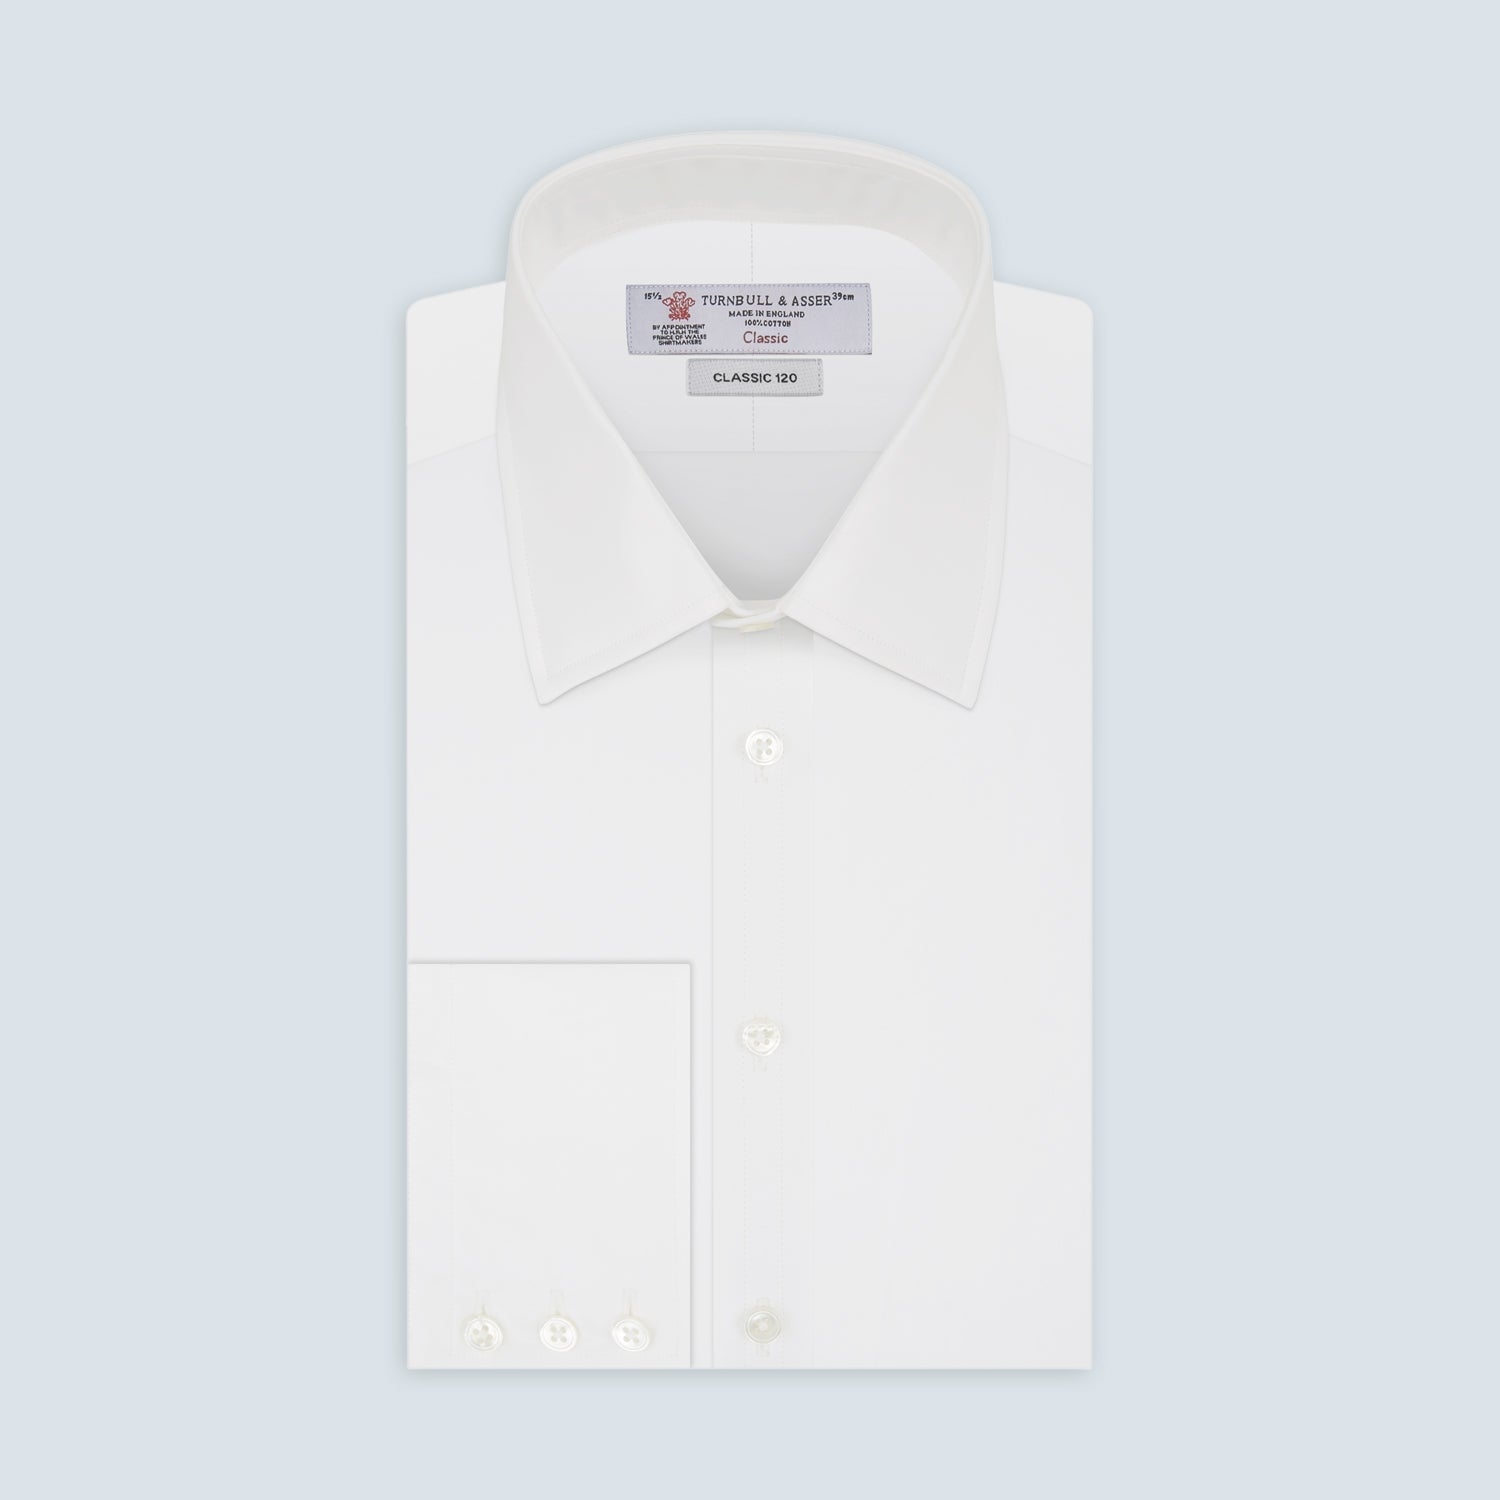 Two-Fold 120 White Shirt with T&A Collar and 3-Button Cuffs